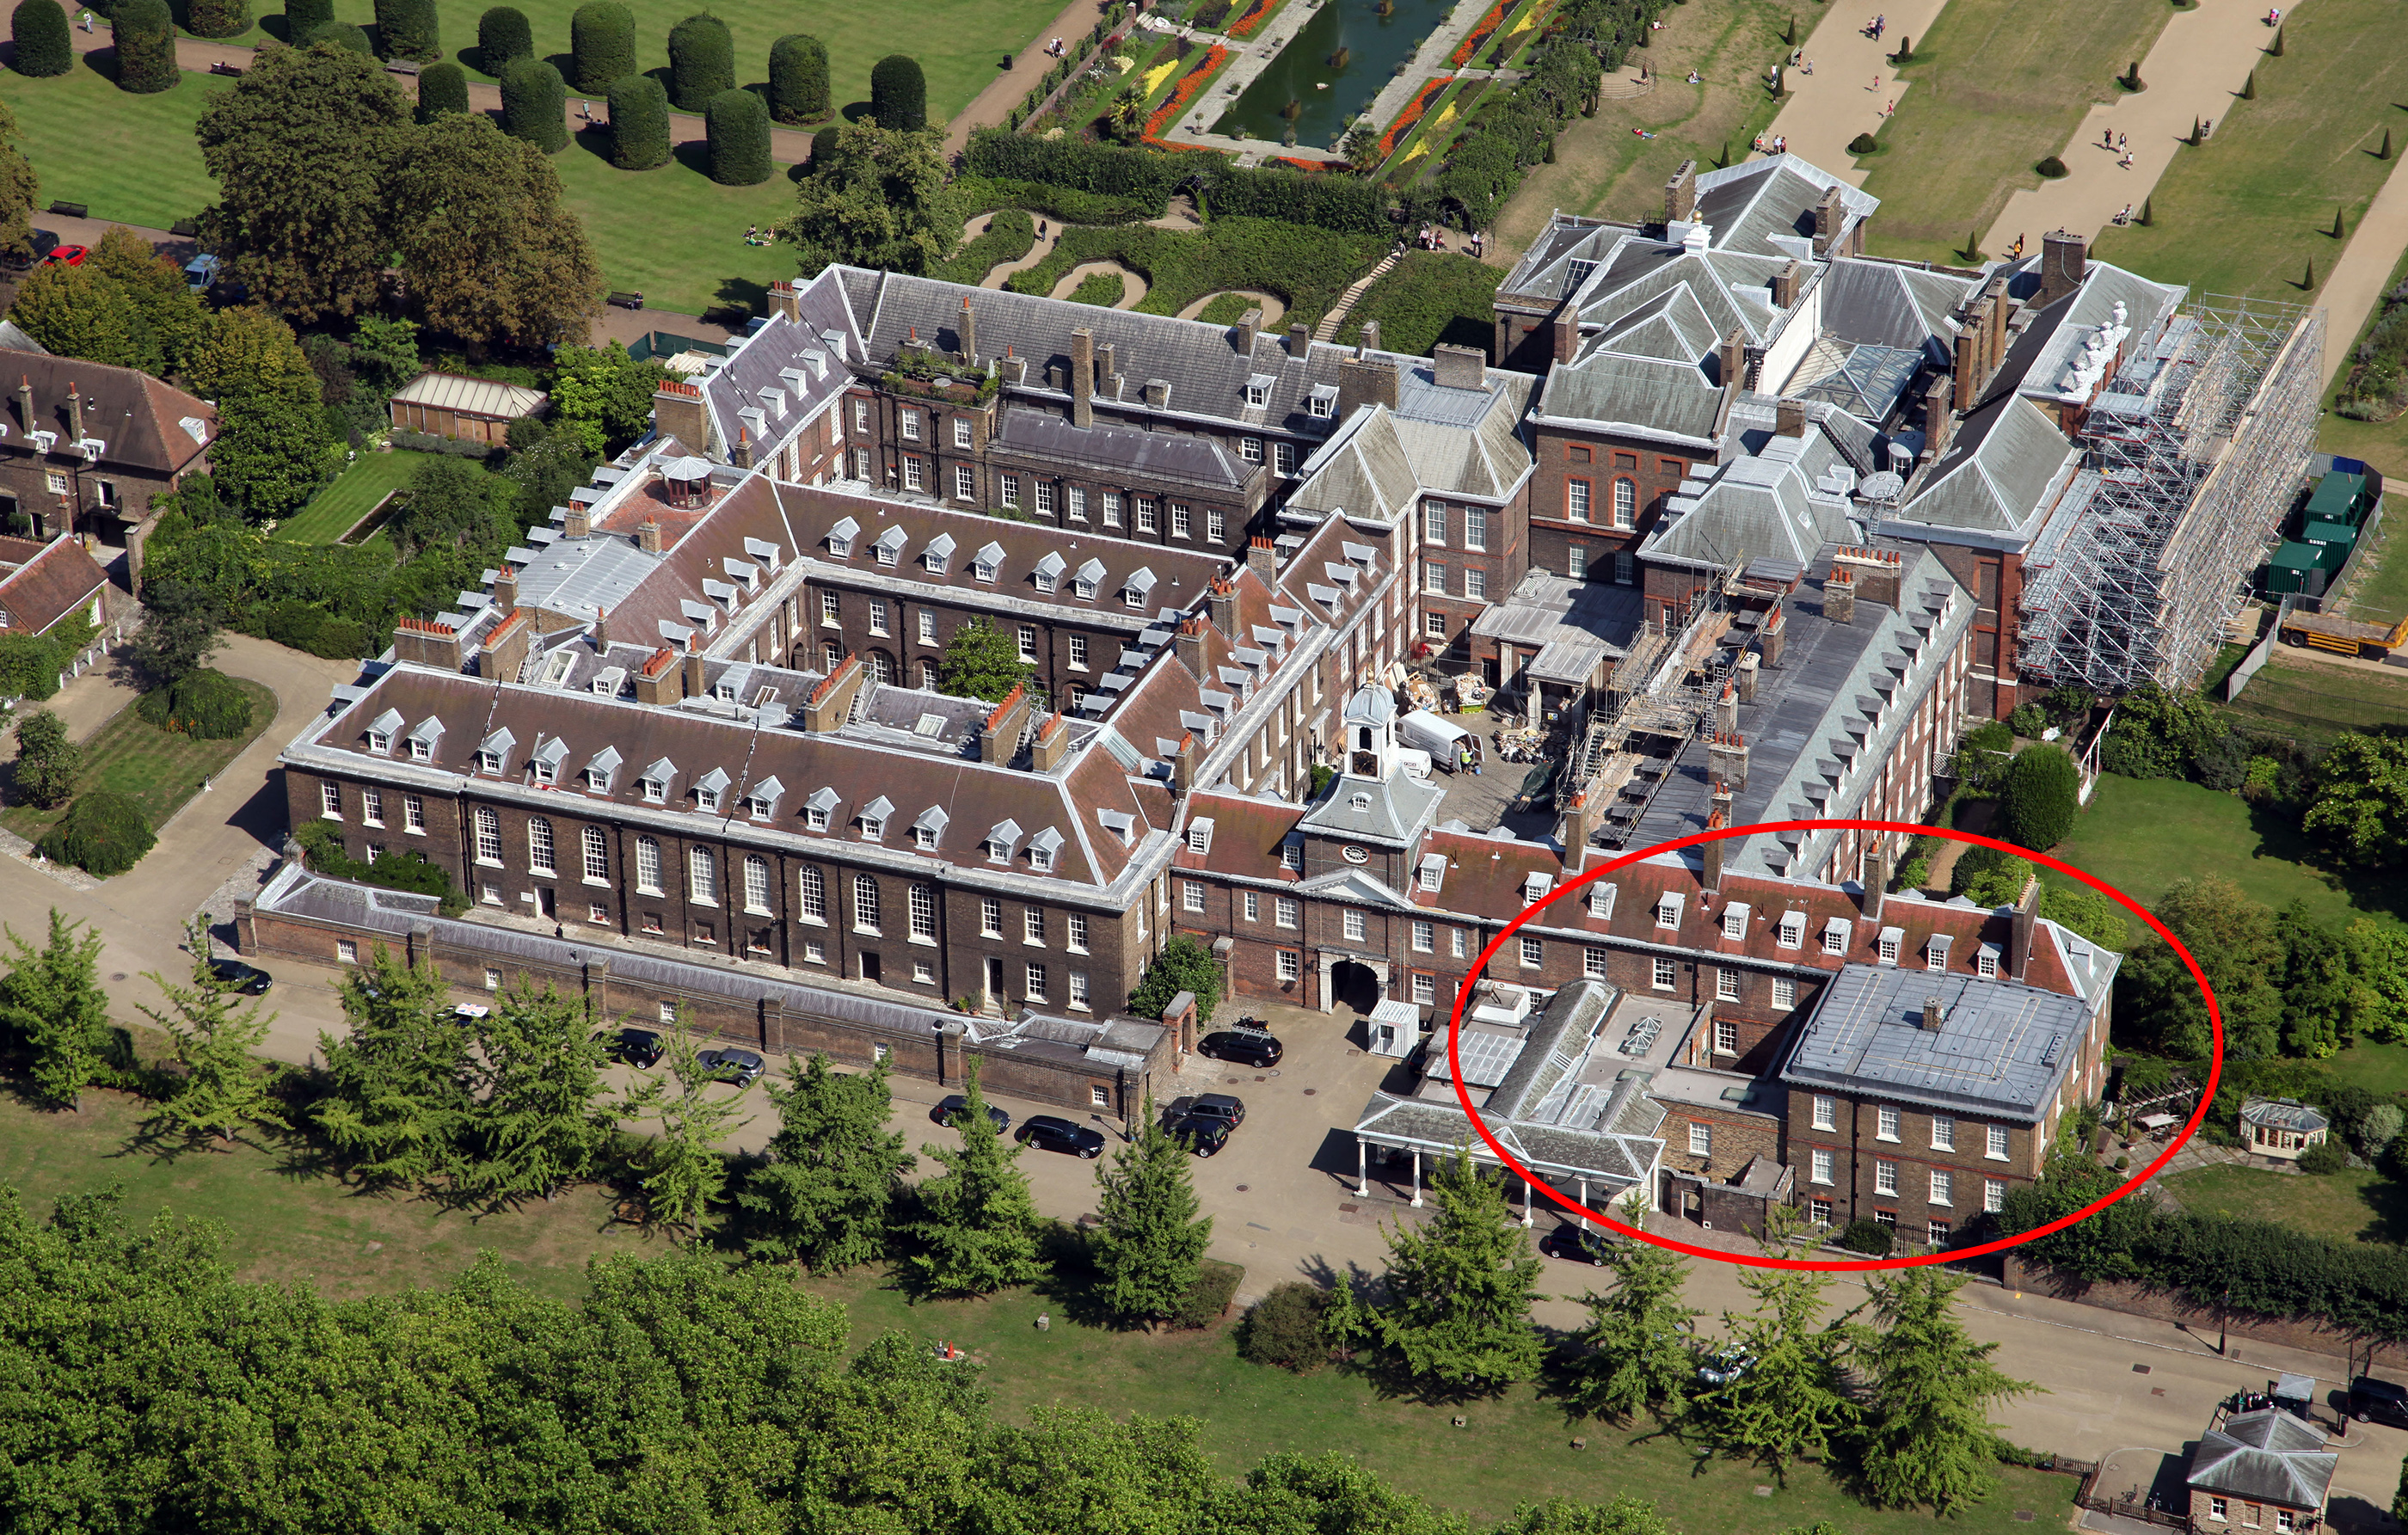 aerial view of Kensington Palace in London, home of Prince William and Kate Middleton the Duchess of Cambridge